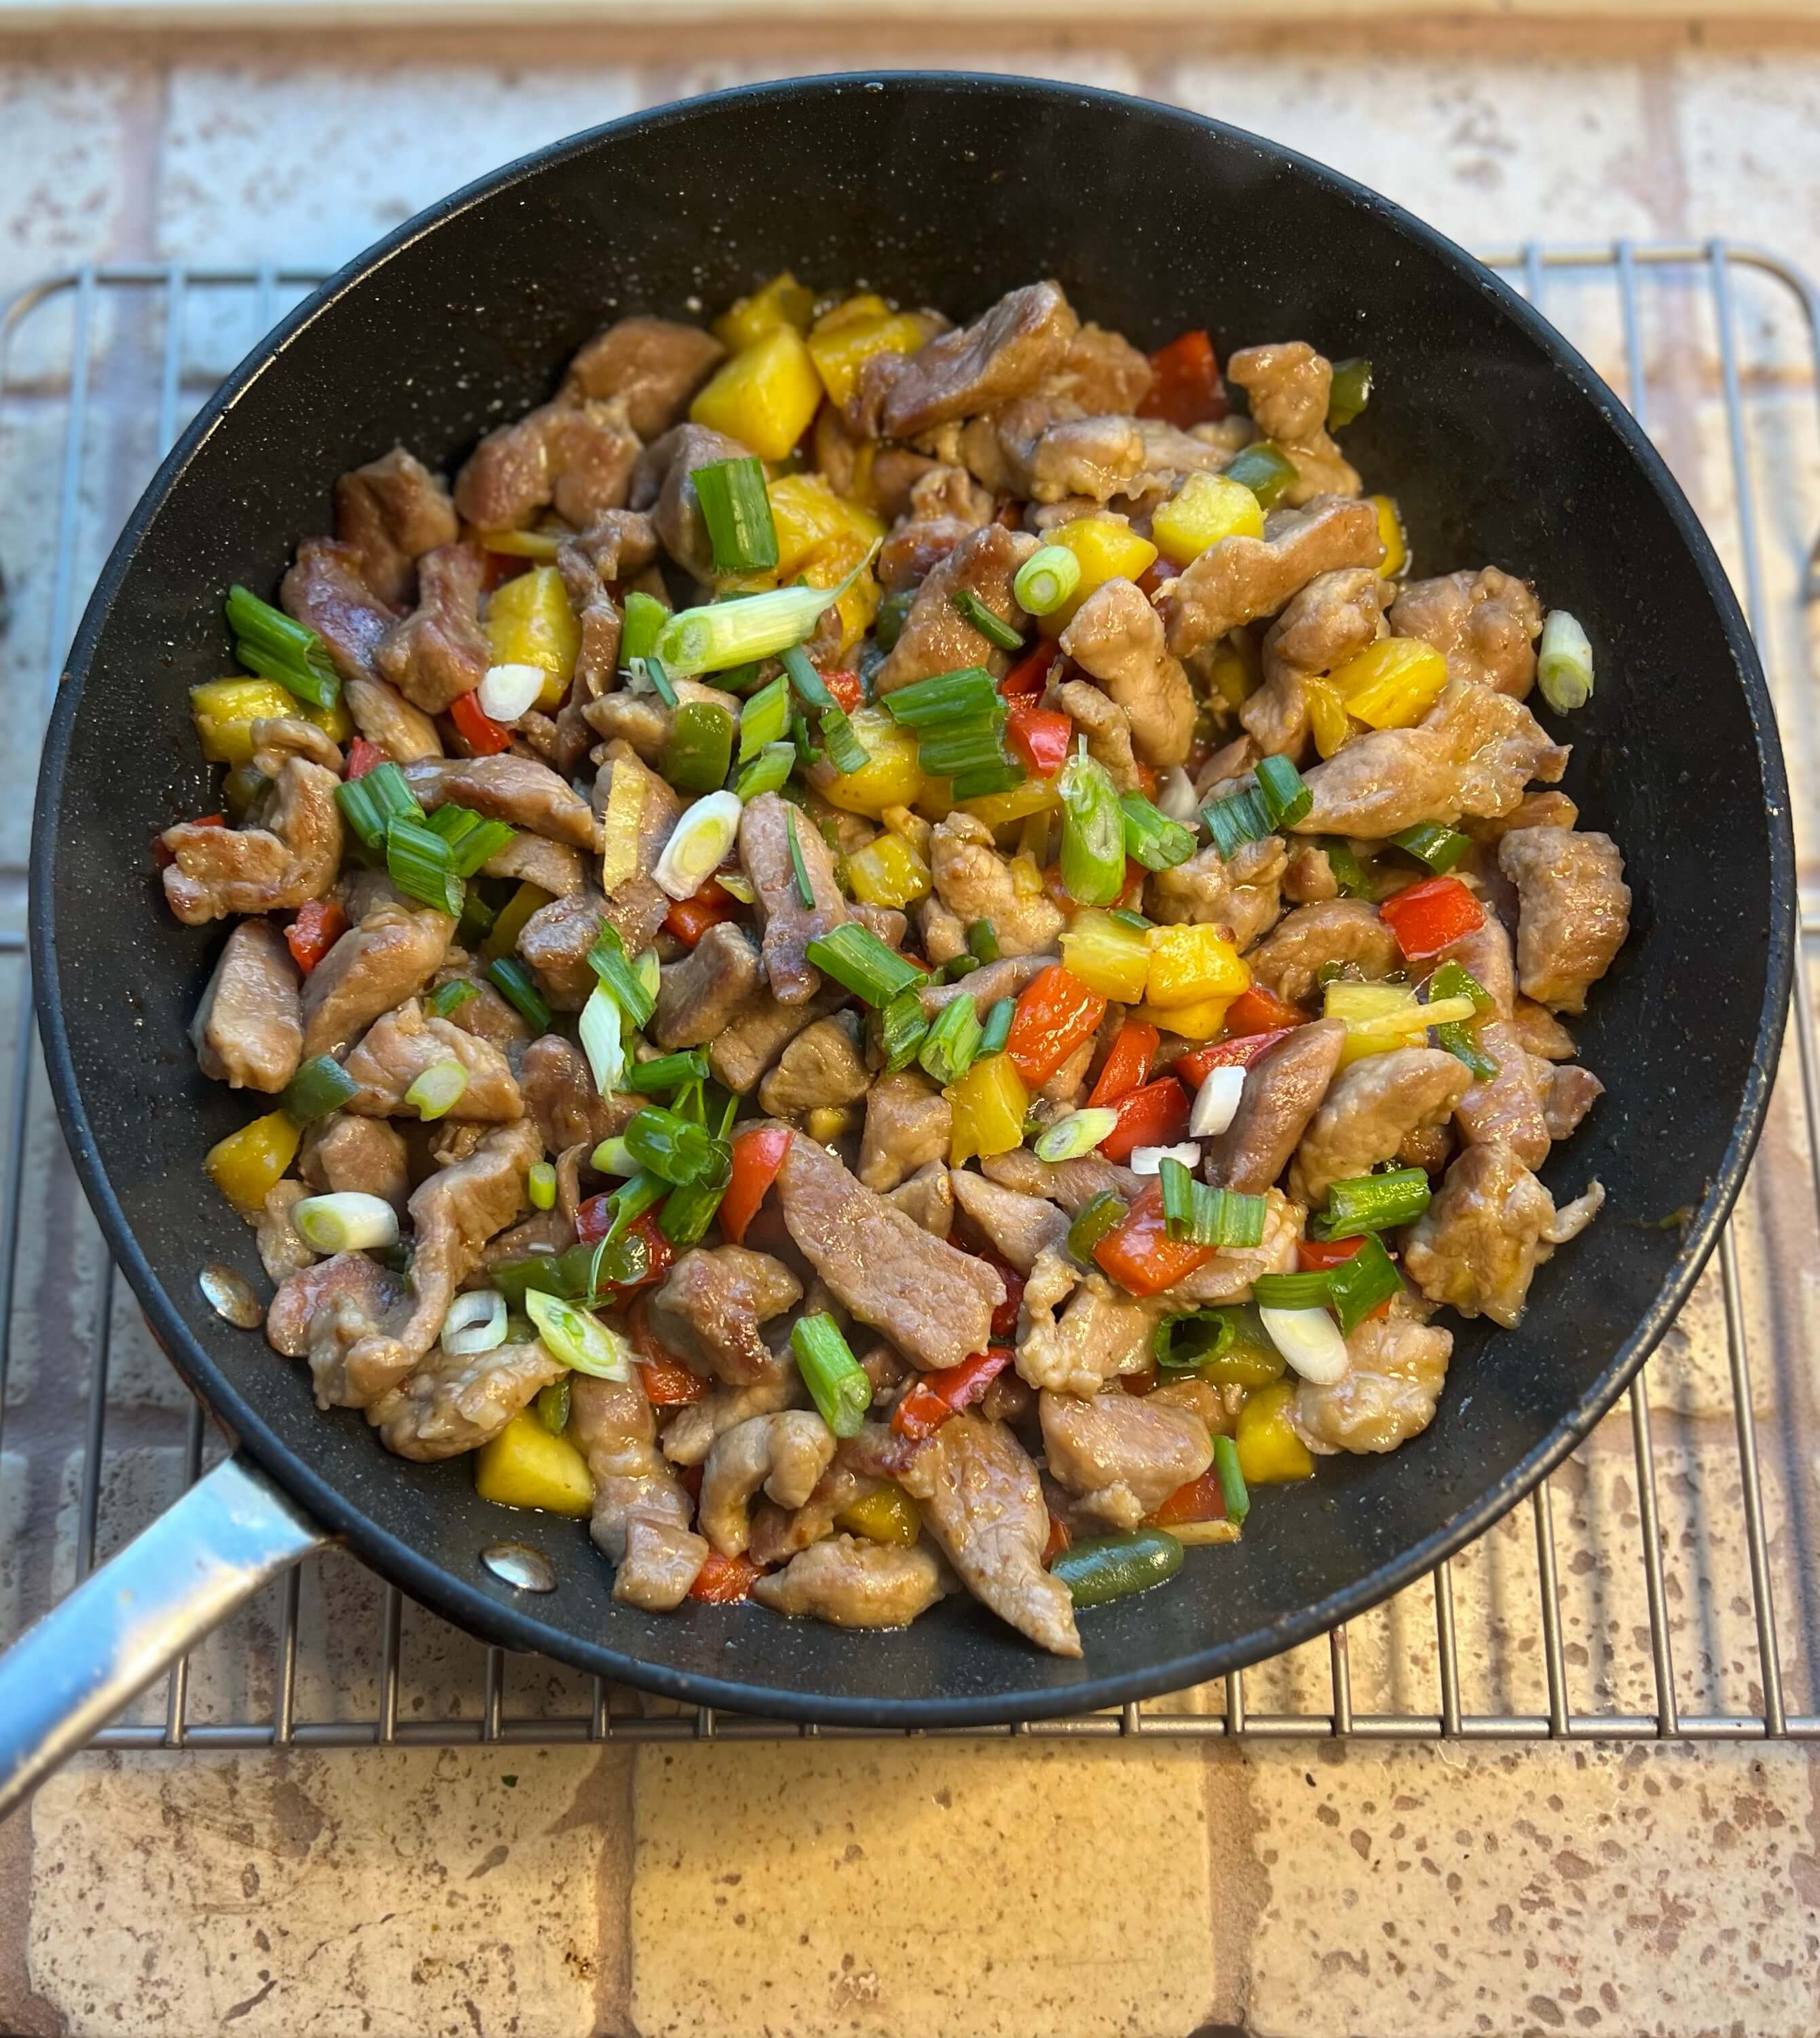 One-Skillet Sweet-and-Sour Stir-Fried Pork with Pineapple